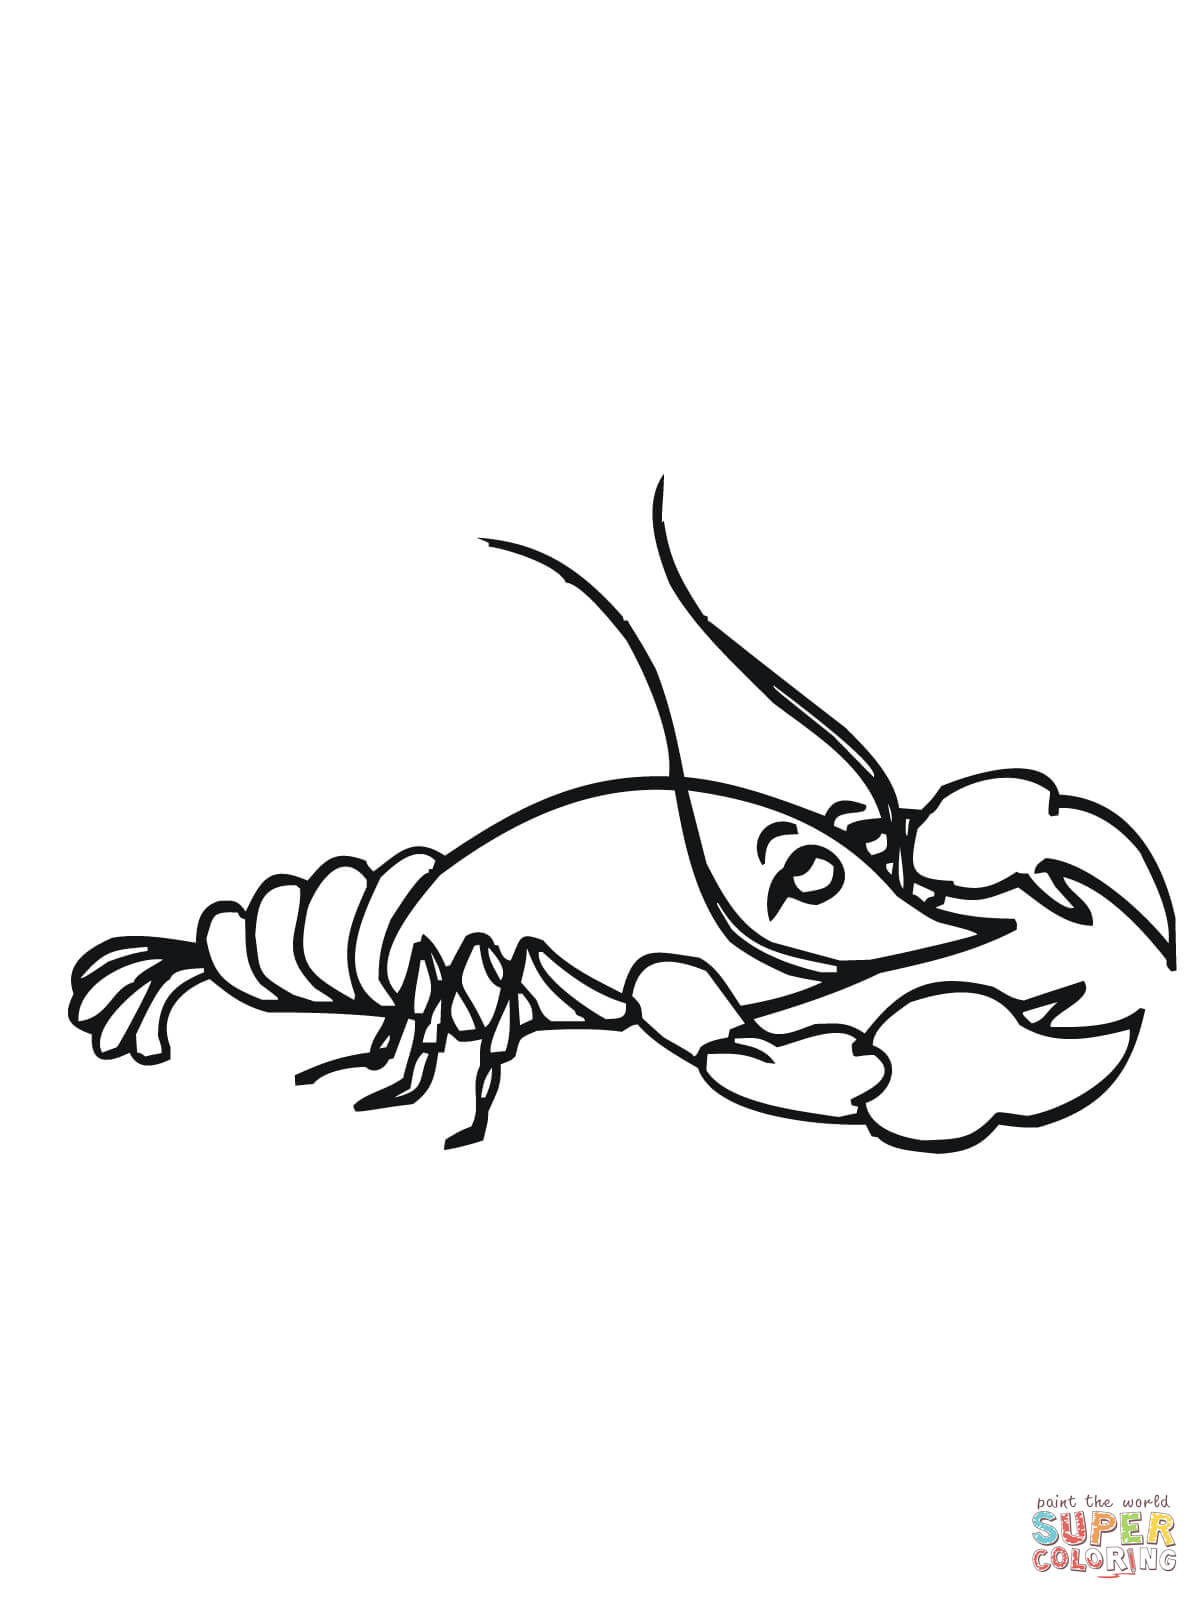 Crawfish coloring pages | Free Coloring Pages